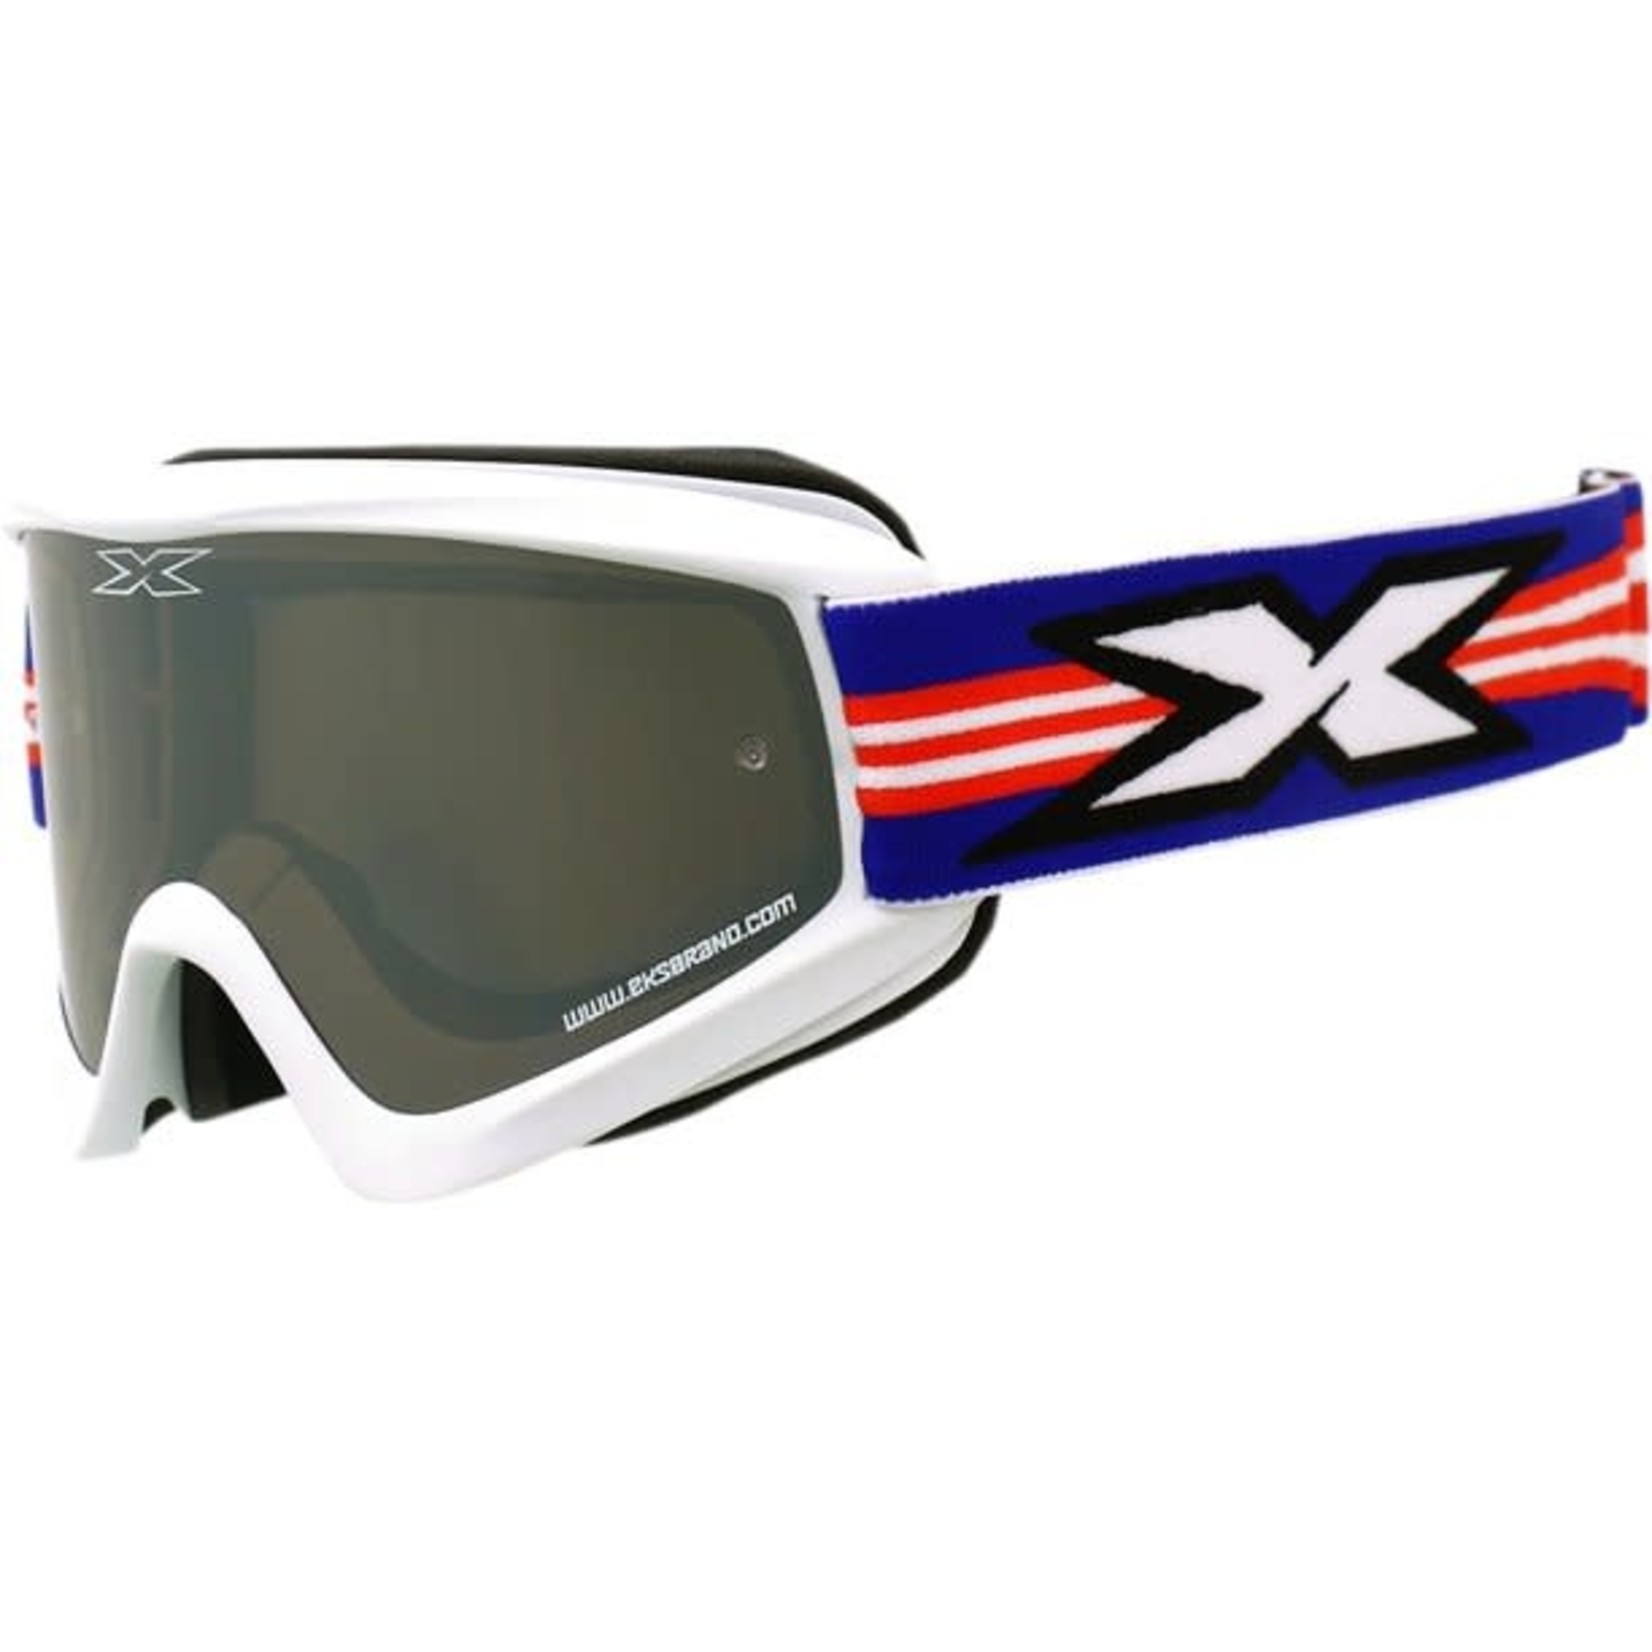 EKS BRAND FLAT OUT MIRROR GOGGLE WHITE/RED/BLUE W/SILVER MIRROR